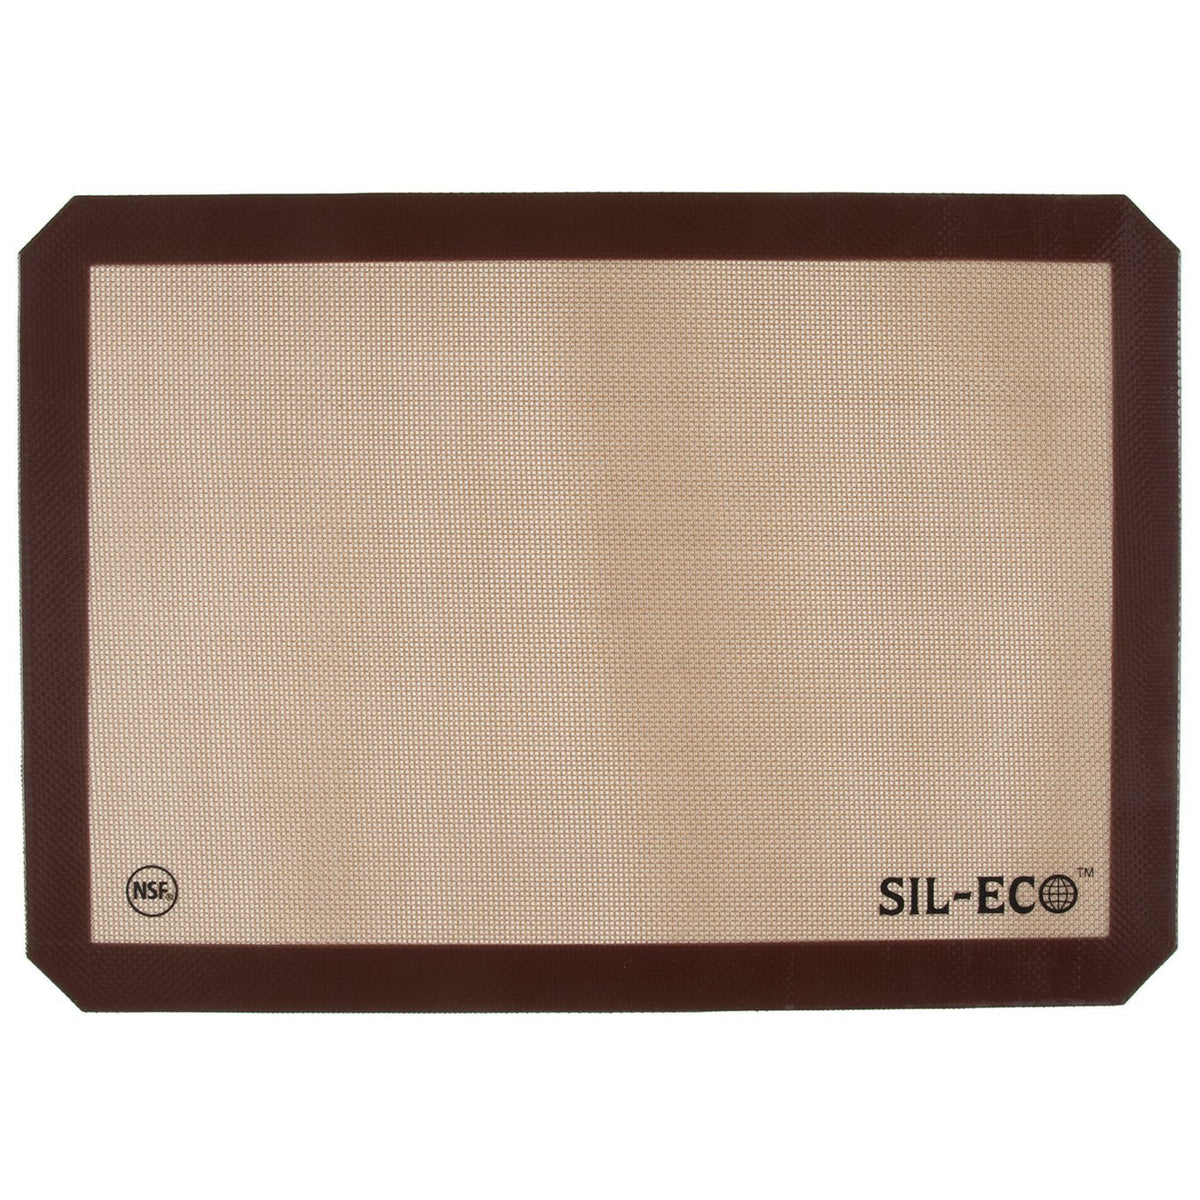 Sil-Eco 99130 Full Size Non-Stick Baking Liner, 16-1/2" x 24-1/2"